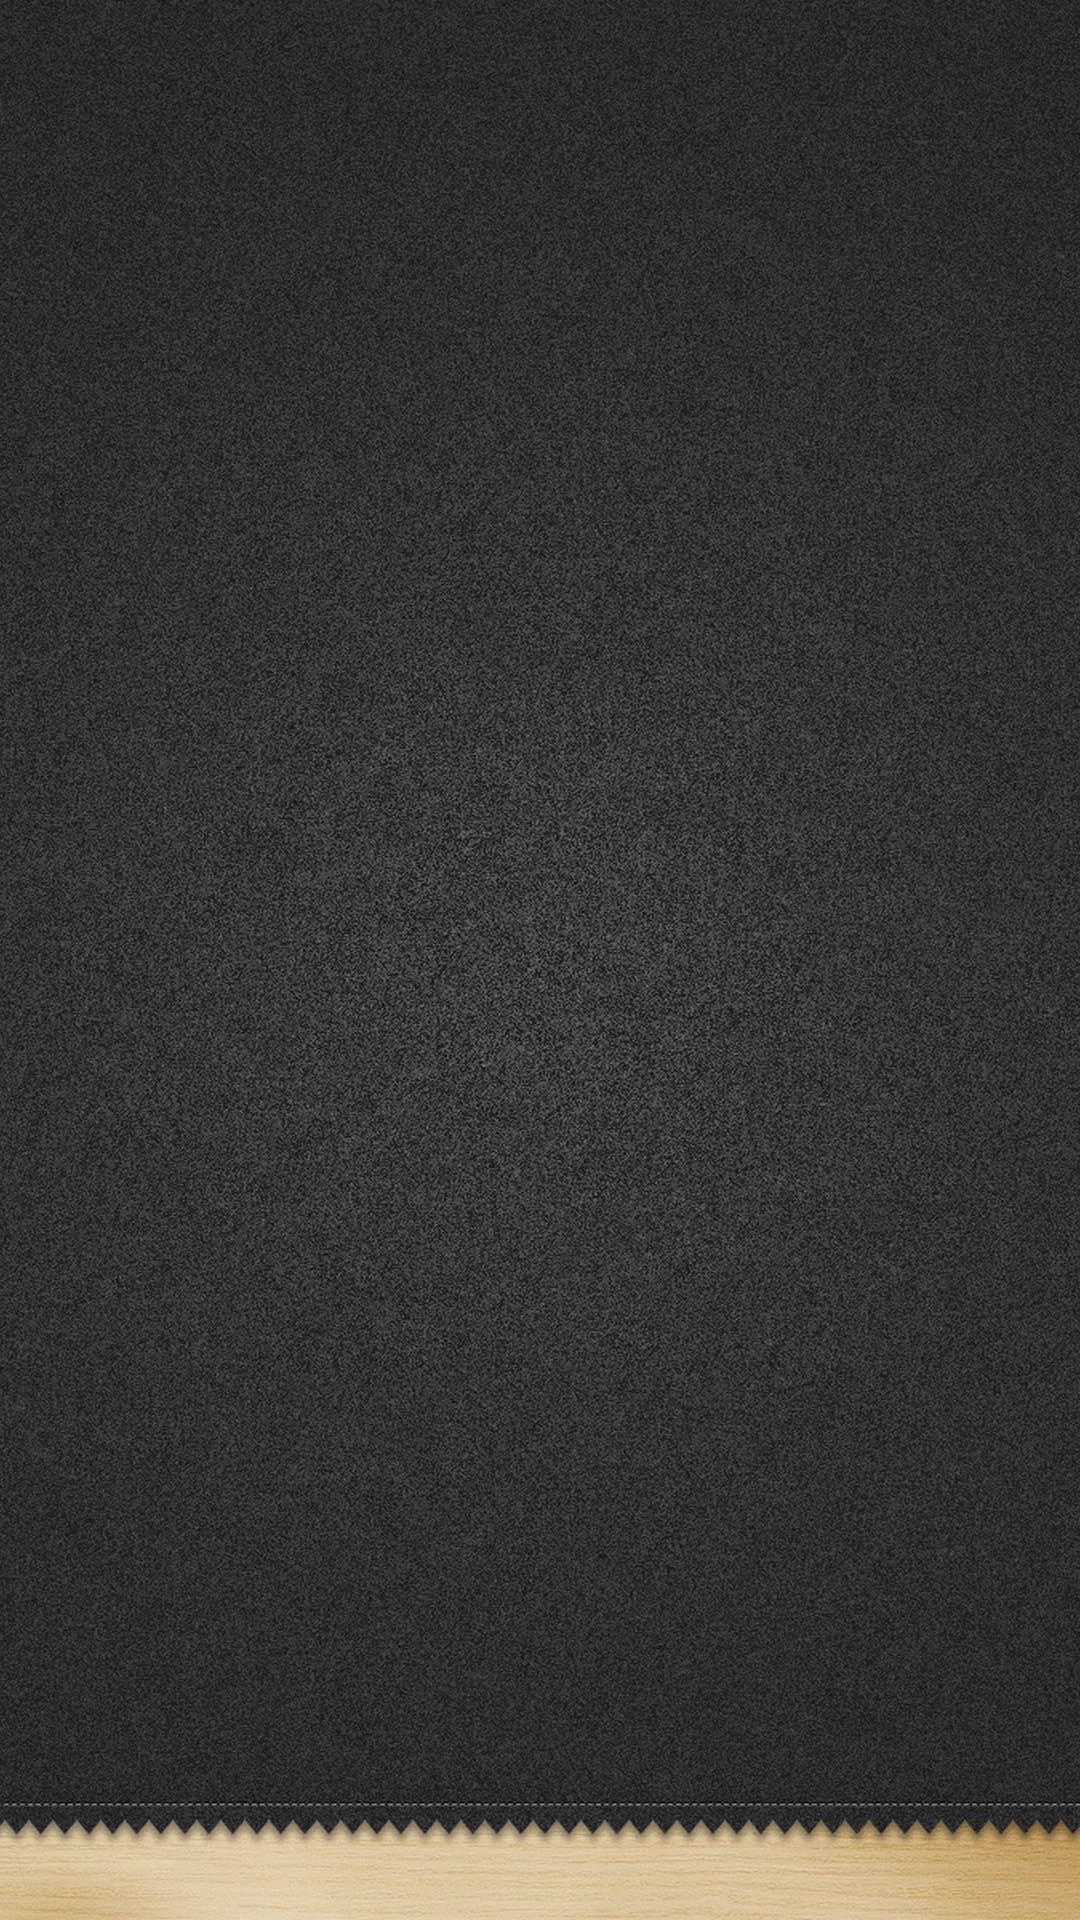 Wallpaper for galaxy s4 with Gray Fabric Texture #2 in 1080x1920 resolution